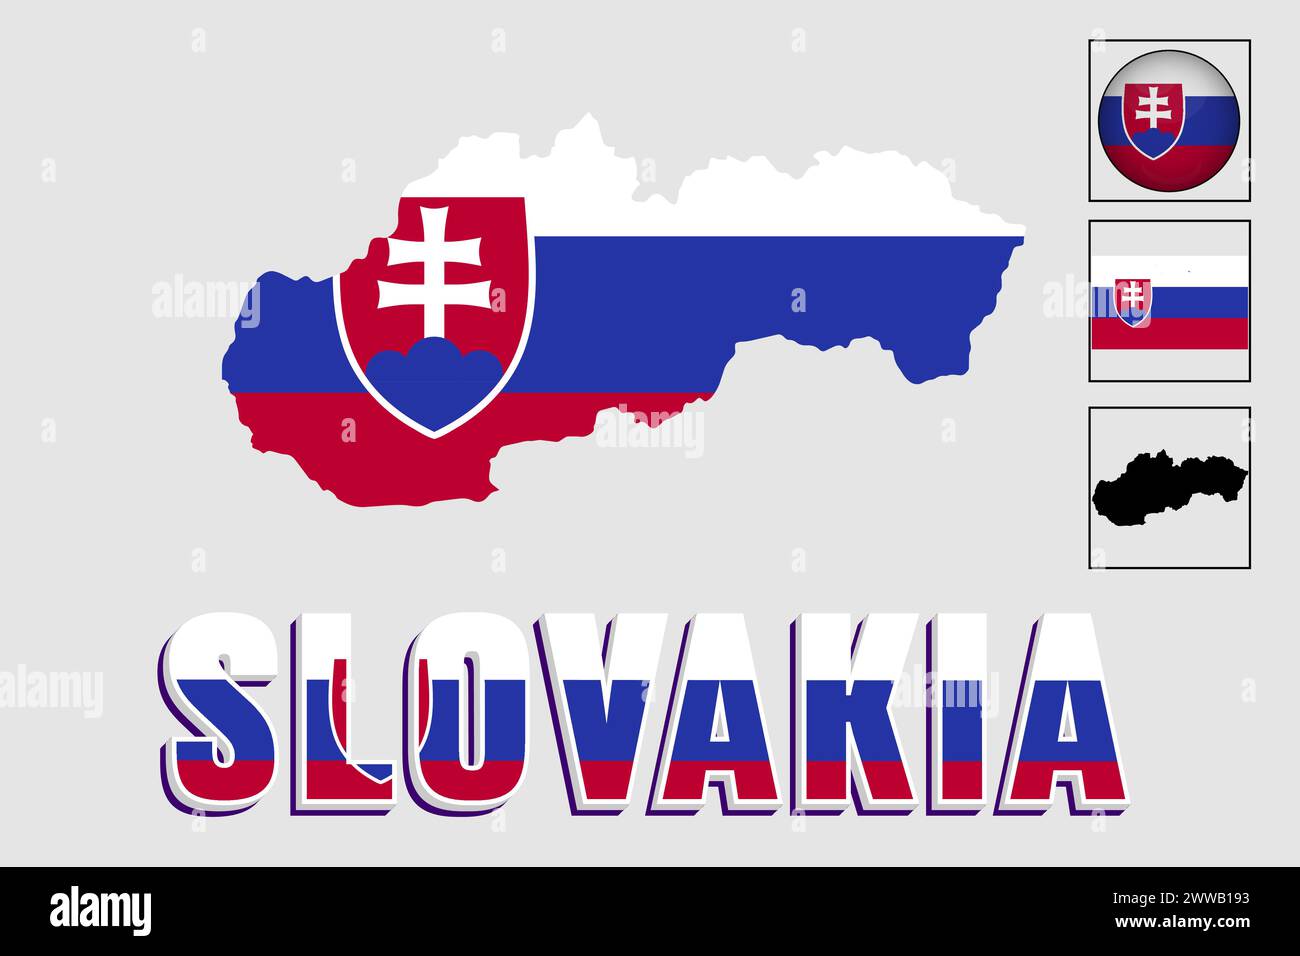 Slovakia flag and map in a vector graphic Stock Vector